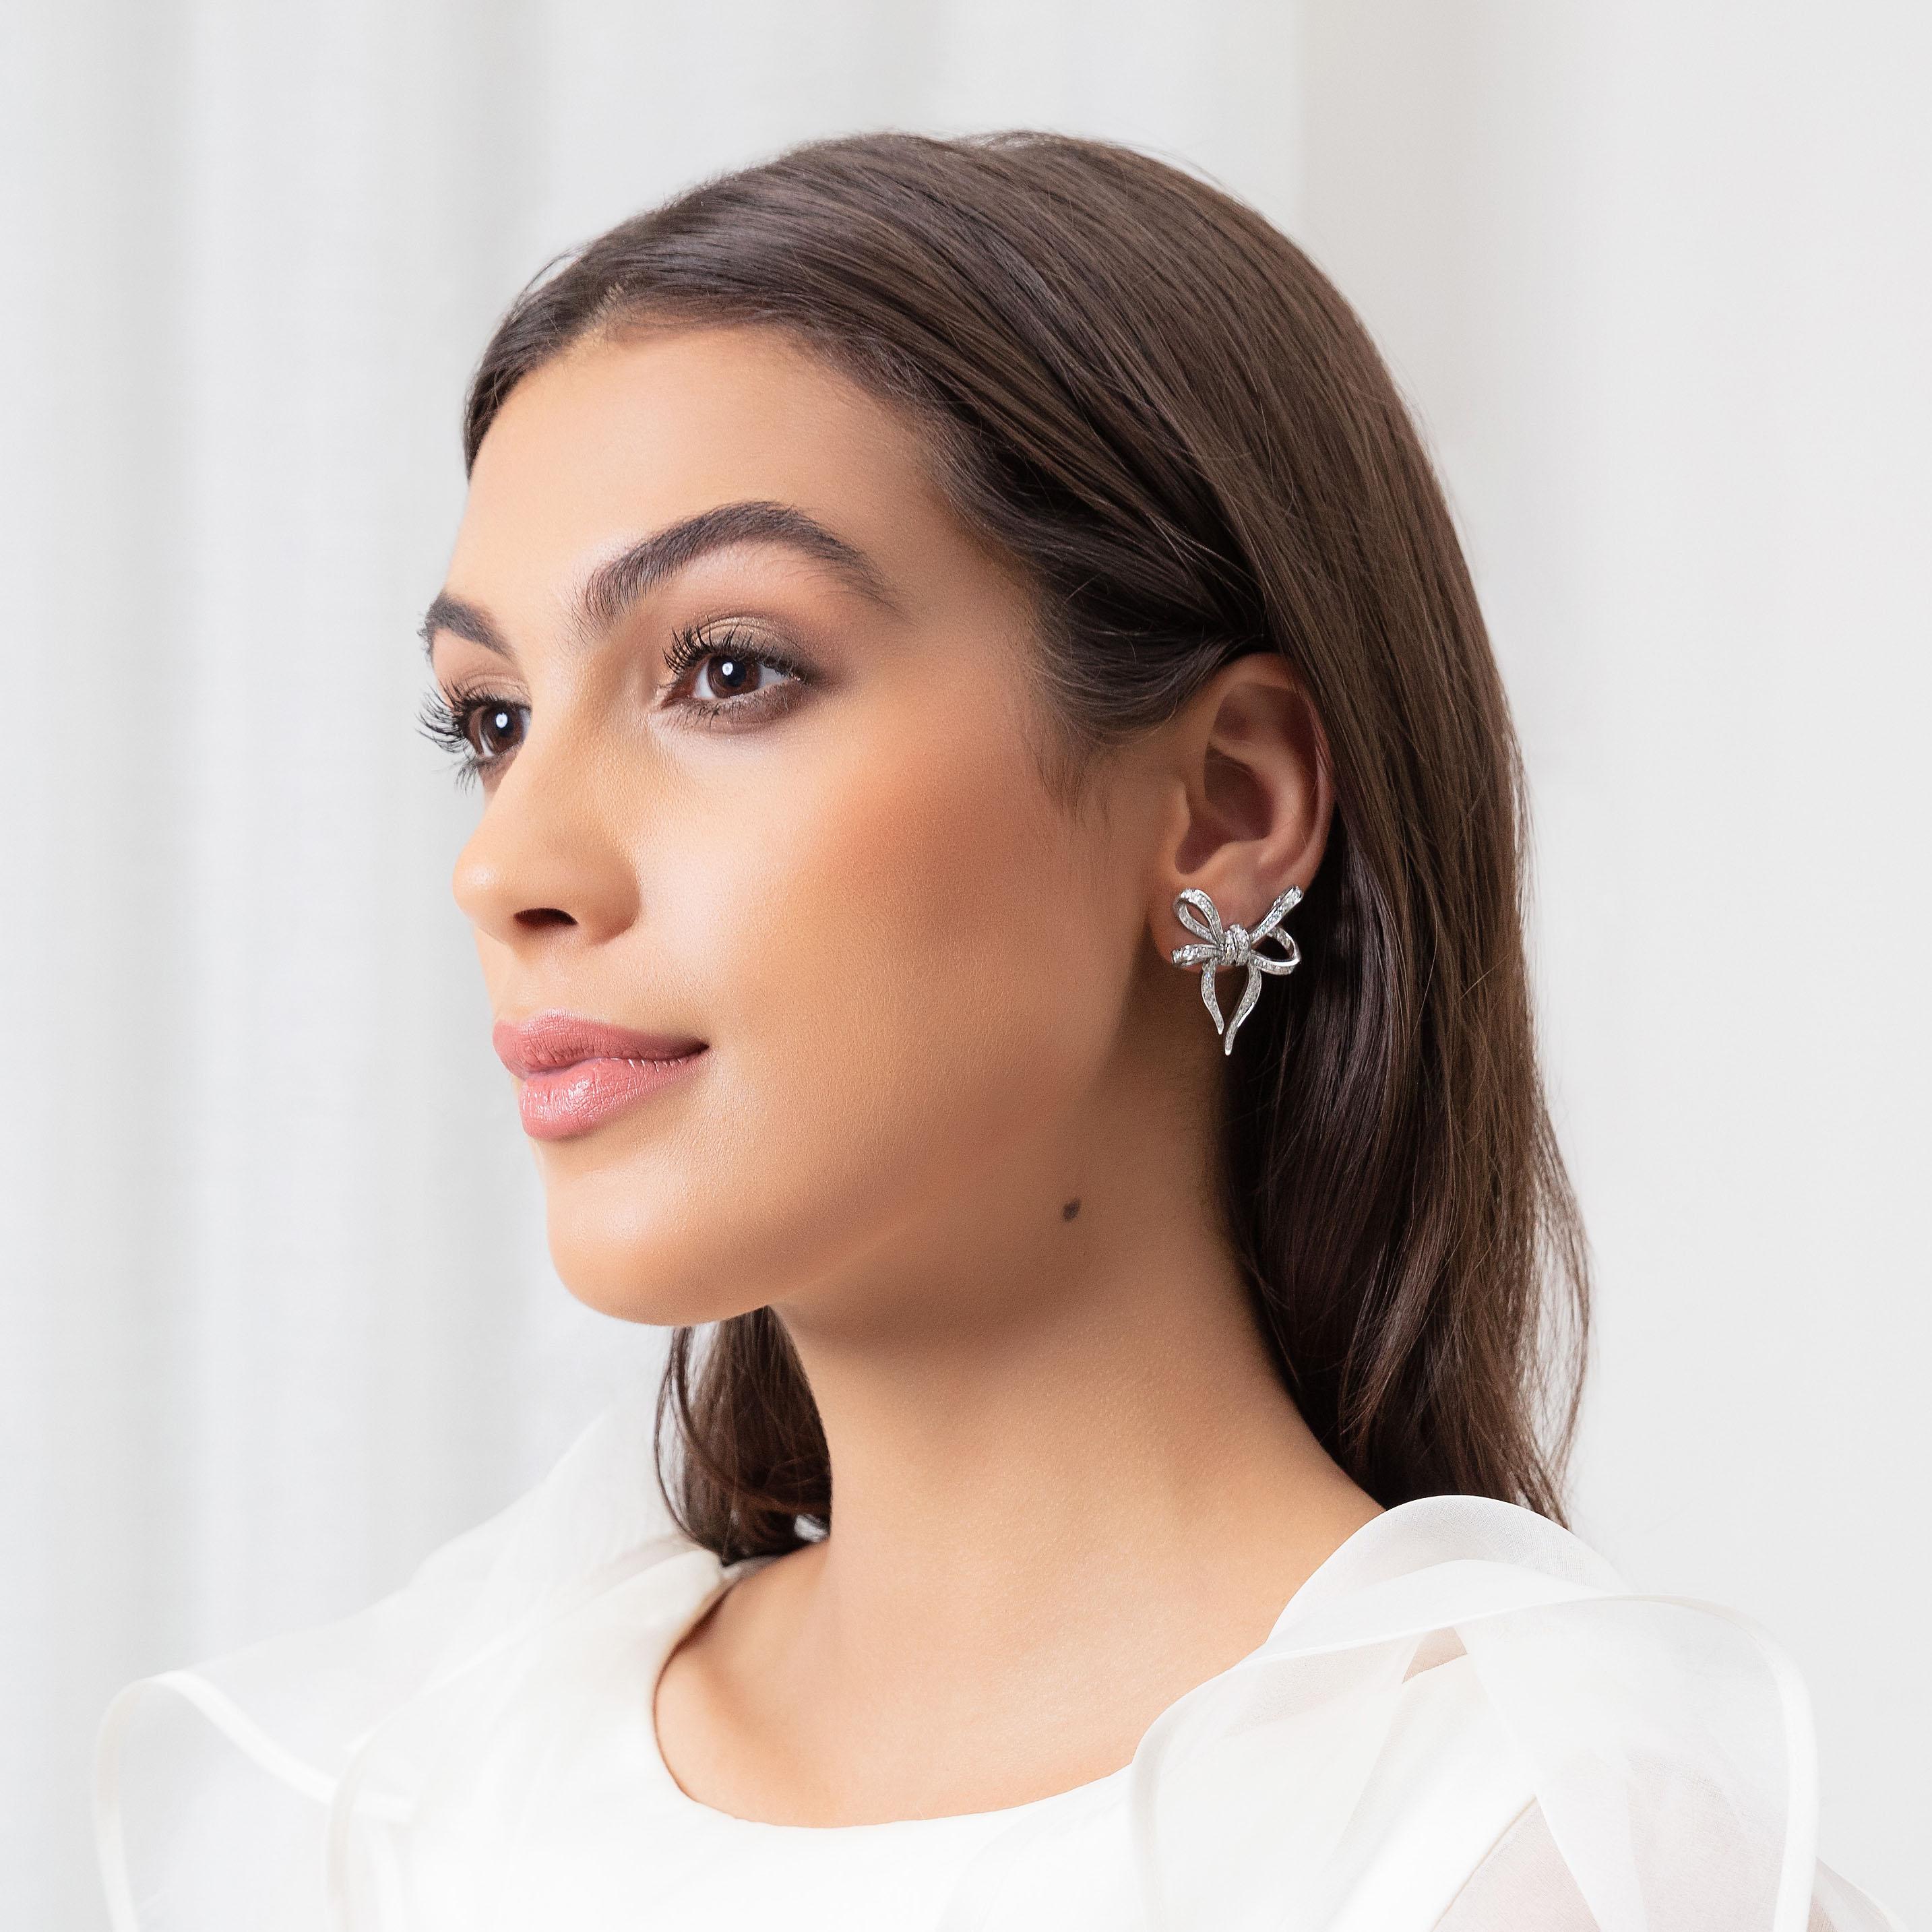 Lyla’s Bow is the first collection designed by Vania Leles. Embodying the spirit of VANLELES’ design, this collection is feminine and timeless, which are a must have for jewellery lovers, and the perfect gift for someone special. Its whimsical style